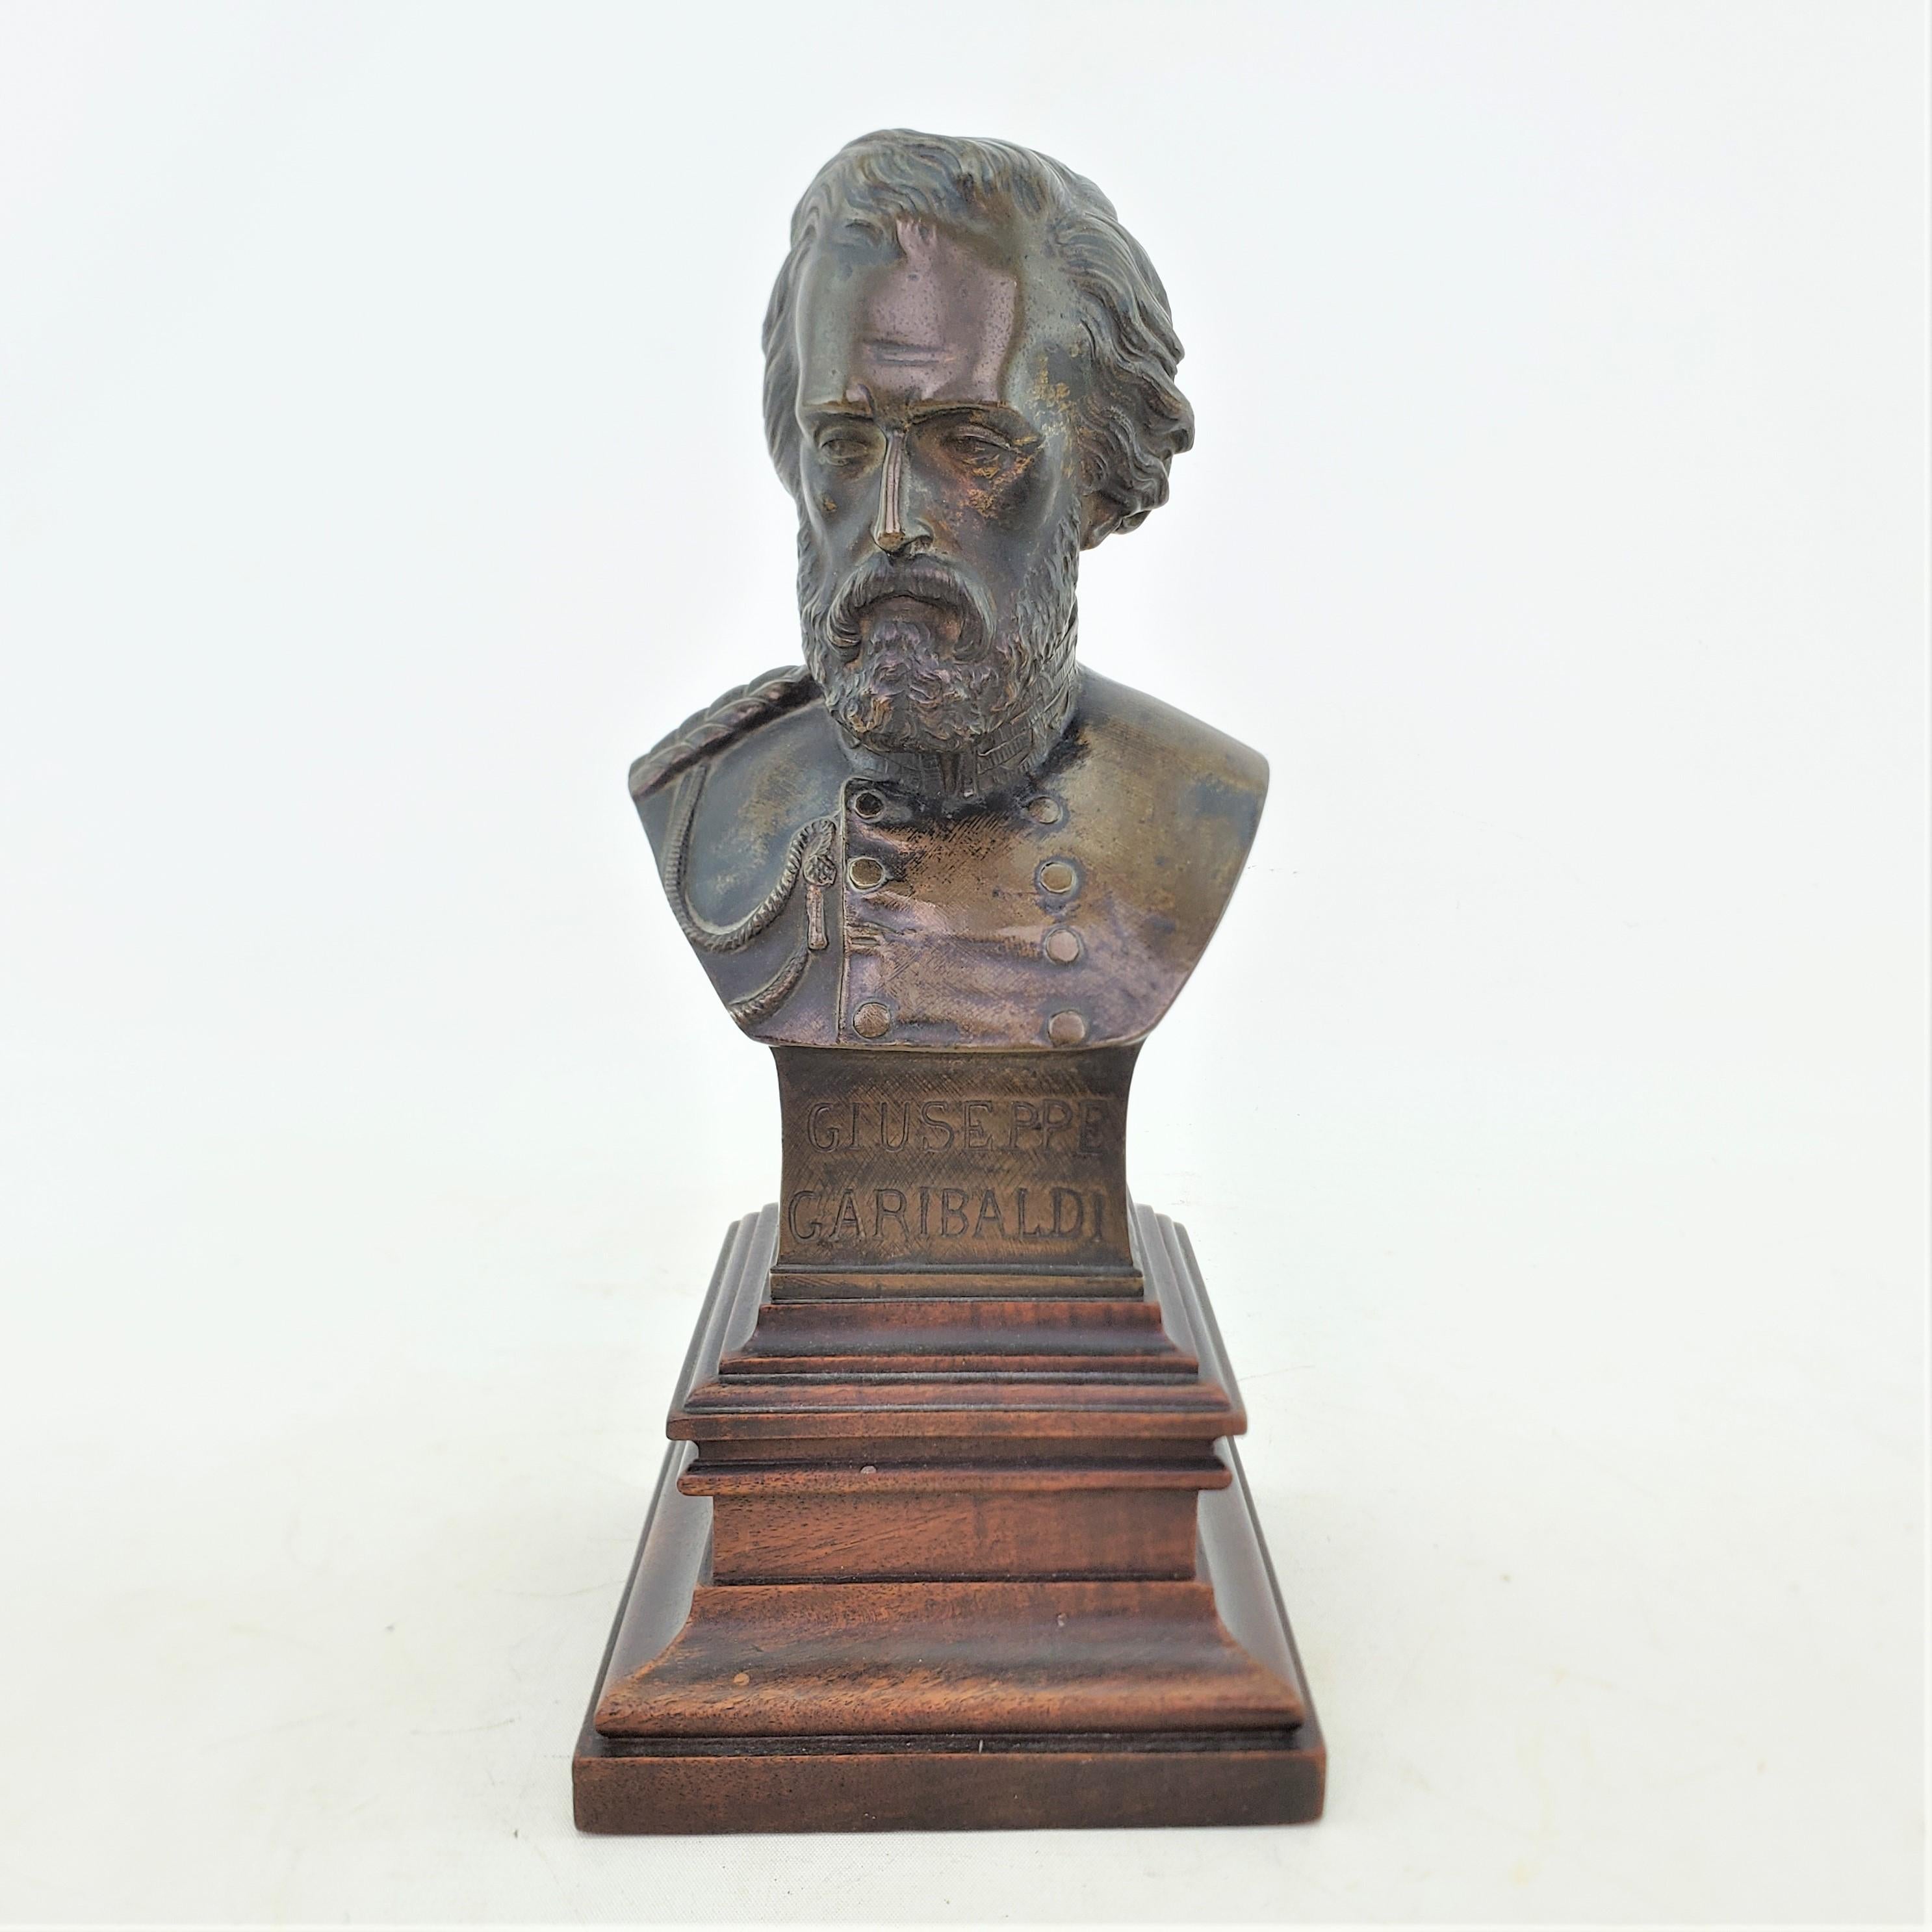 This antique bronze sculpture may be signed on the back by an unknown artist and presumed to date to approximately 1900 and originate from Italy. The well executed bronze sculpture depicts the very famous Italian, Giuseppe Garibaldi in a military